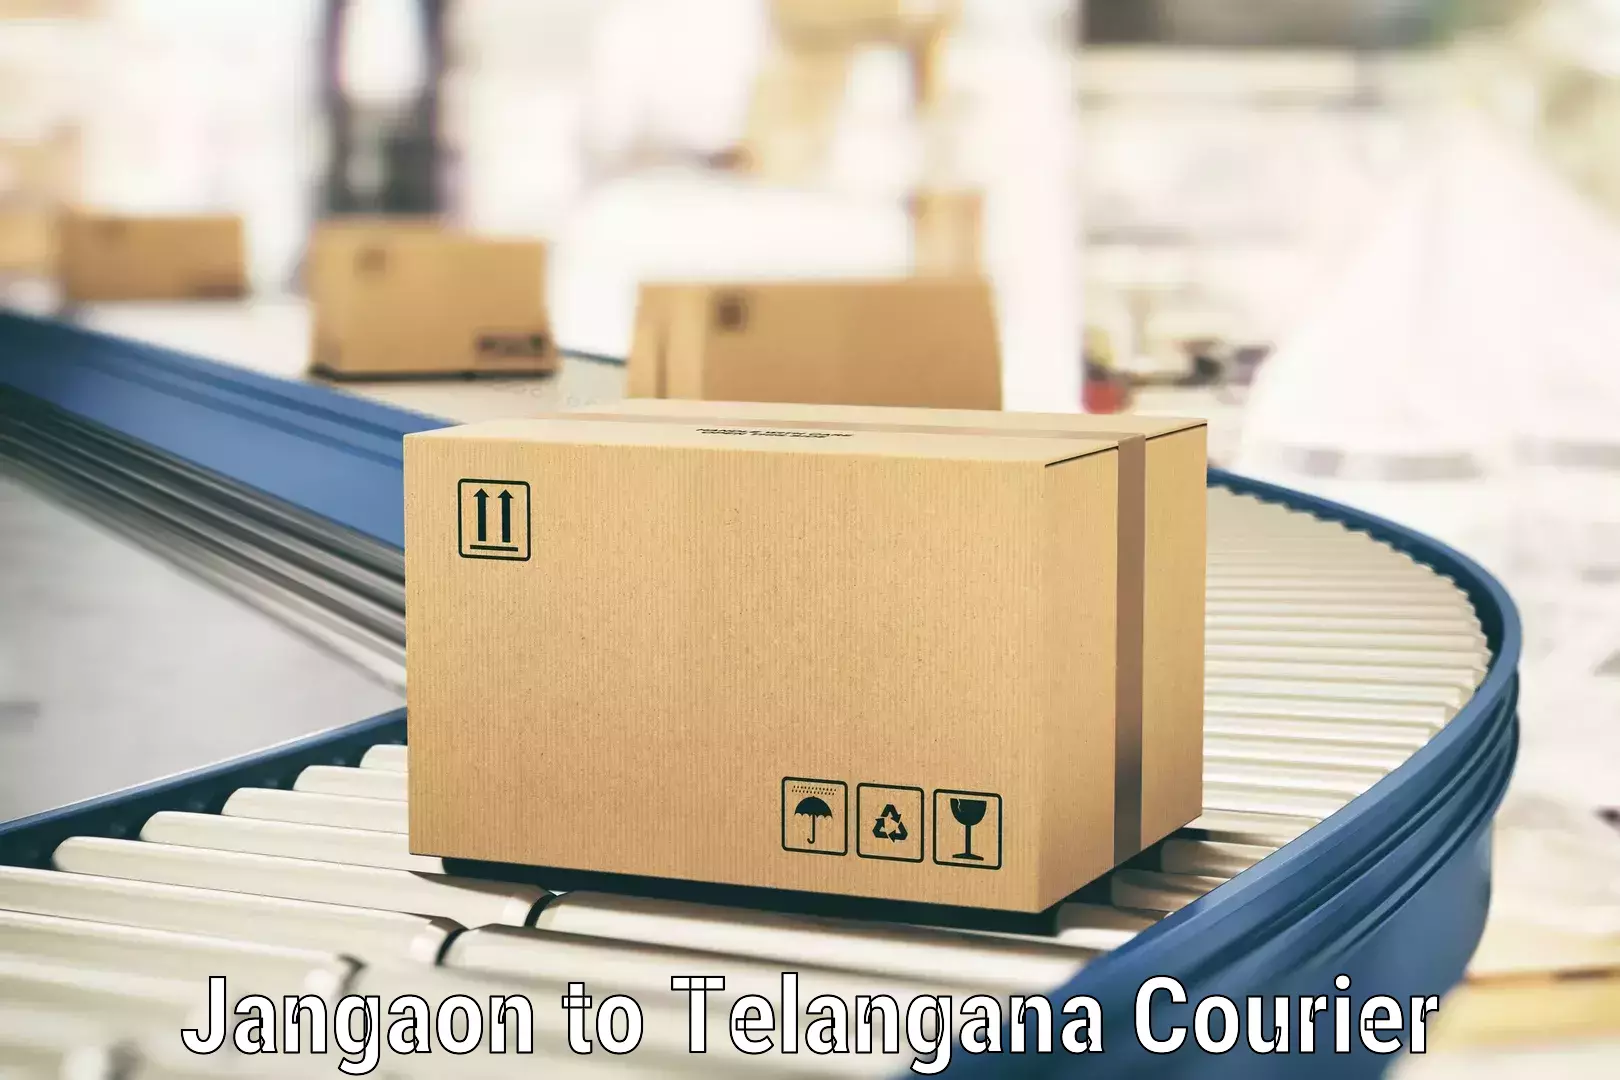 Bulk courier orders in Jangaon to Alair